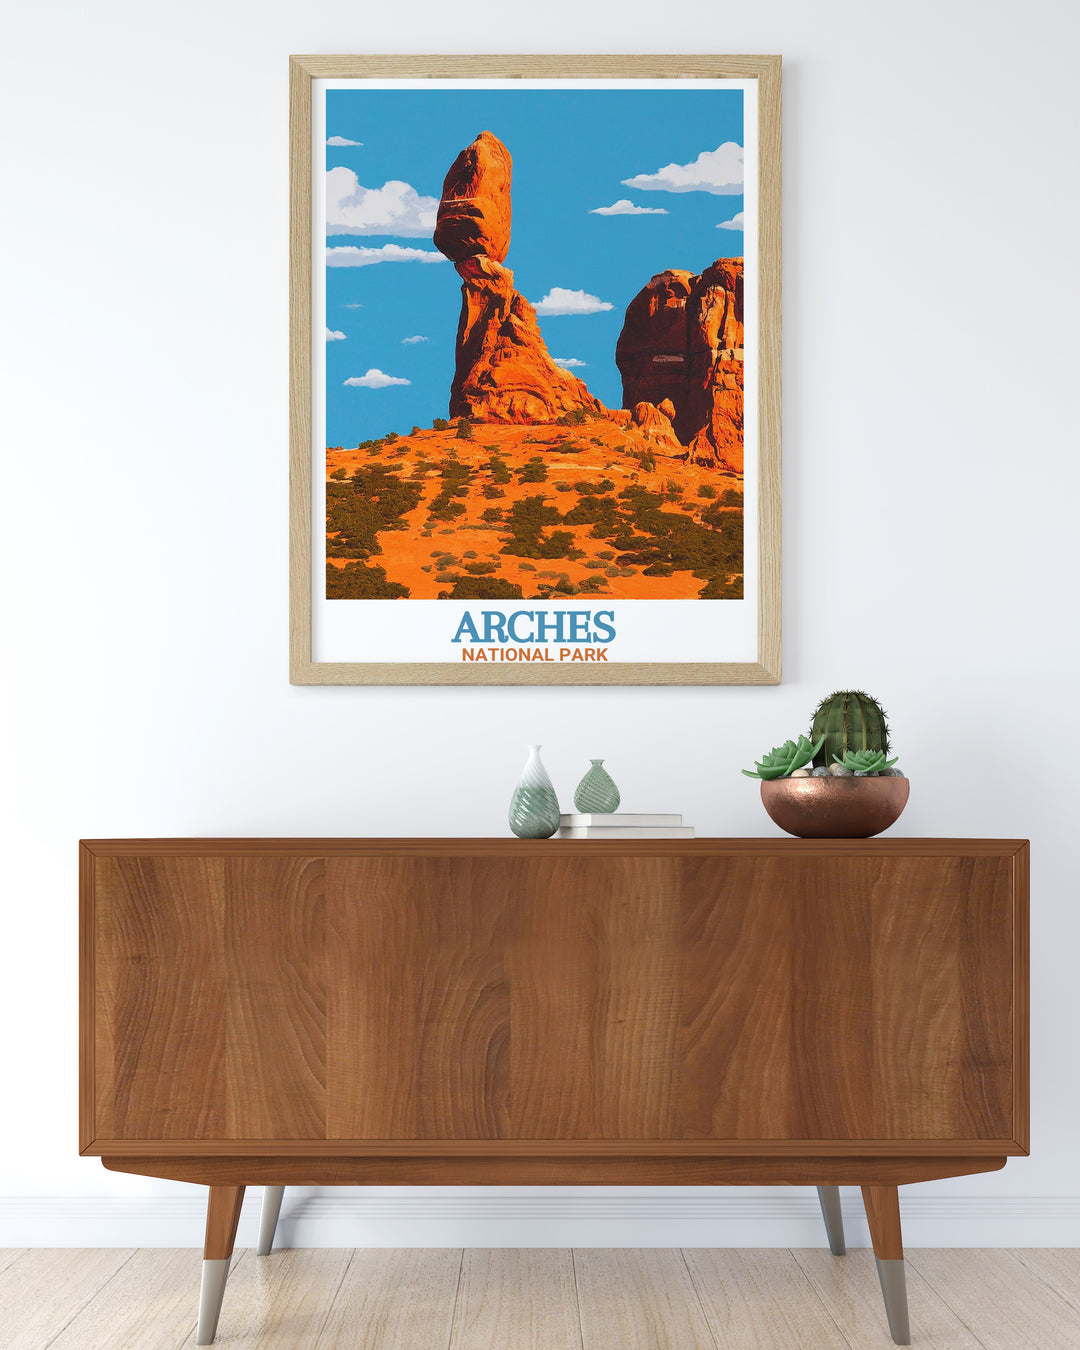 Beautiful Balanced Rock print capturing the natural wonder of Arches National Park ideal for home decor or as a unique gift for friends and family who appreciate National Park artwork and the great outdoors.